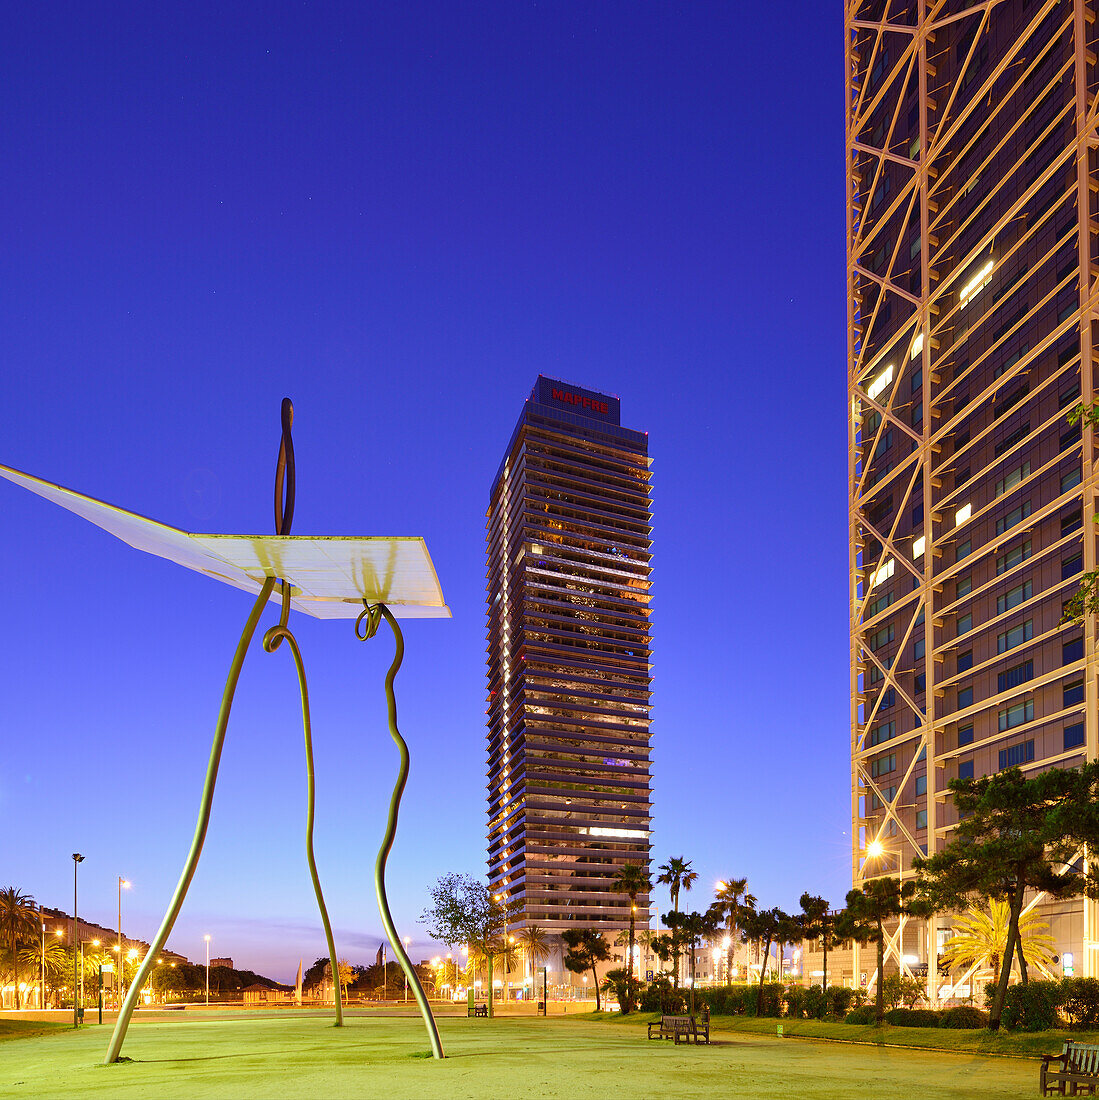 Modern sculpture in front of twin towers Hotel Arts and Mapfre Tower, illuminated, Olympic village, Barceloneta, Barcelona, Catalonia, Spain